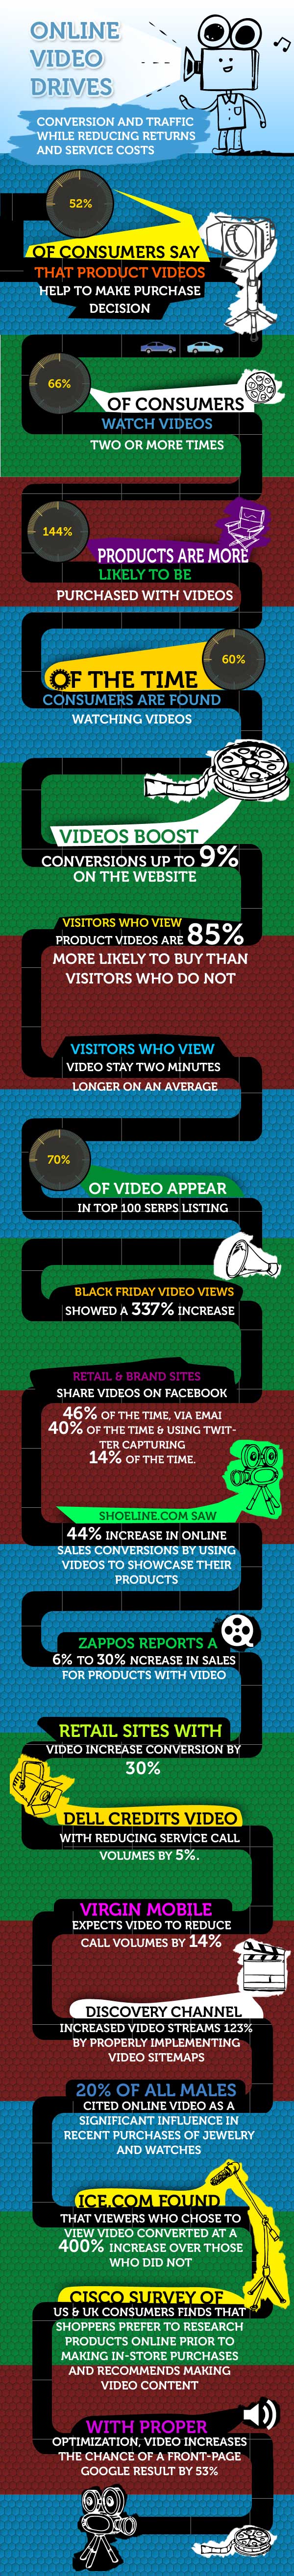 Online-Video-Drives-Conversion-And-Traffic-infographic